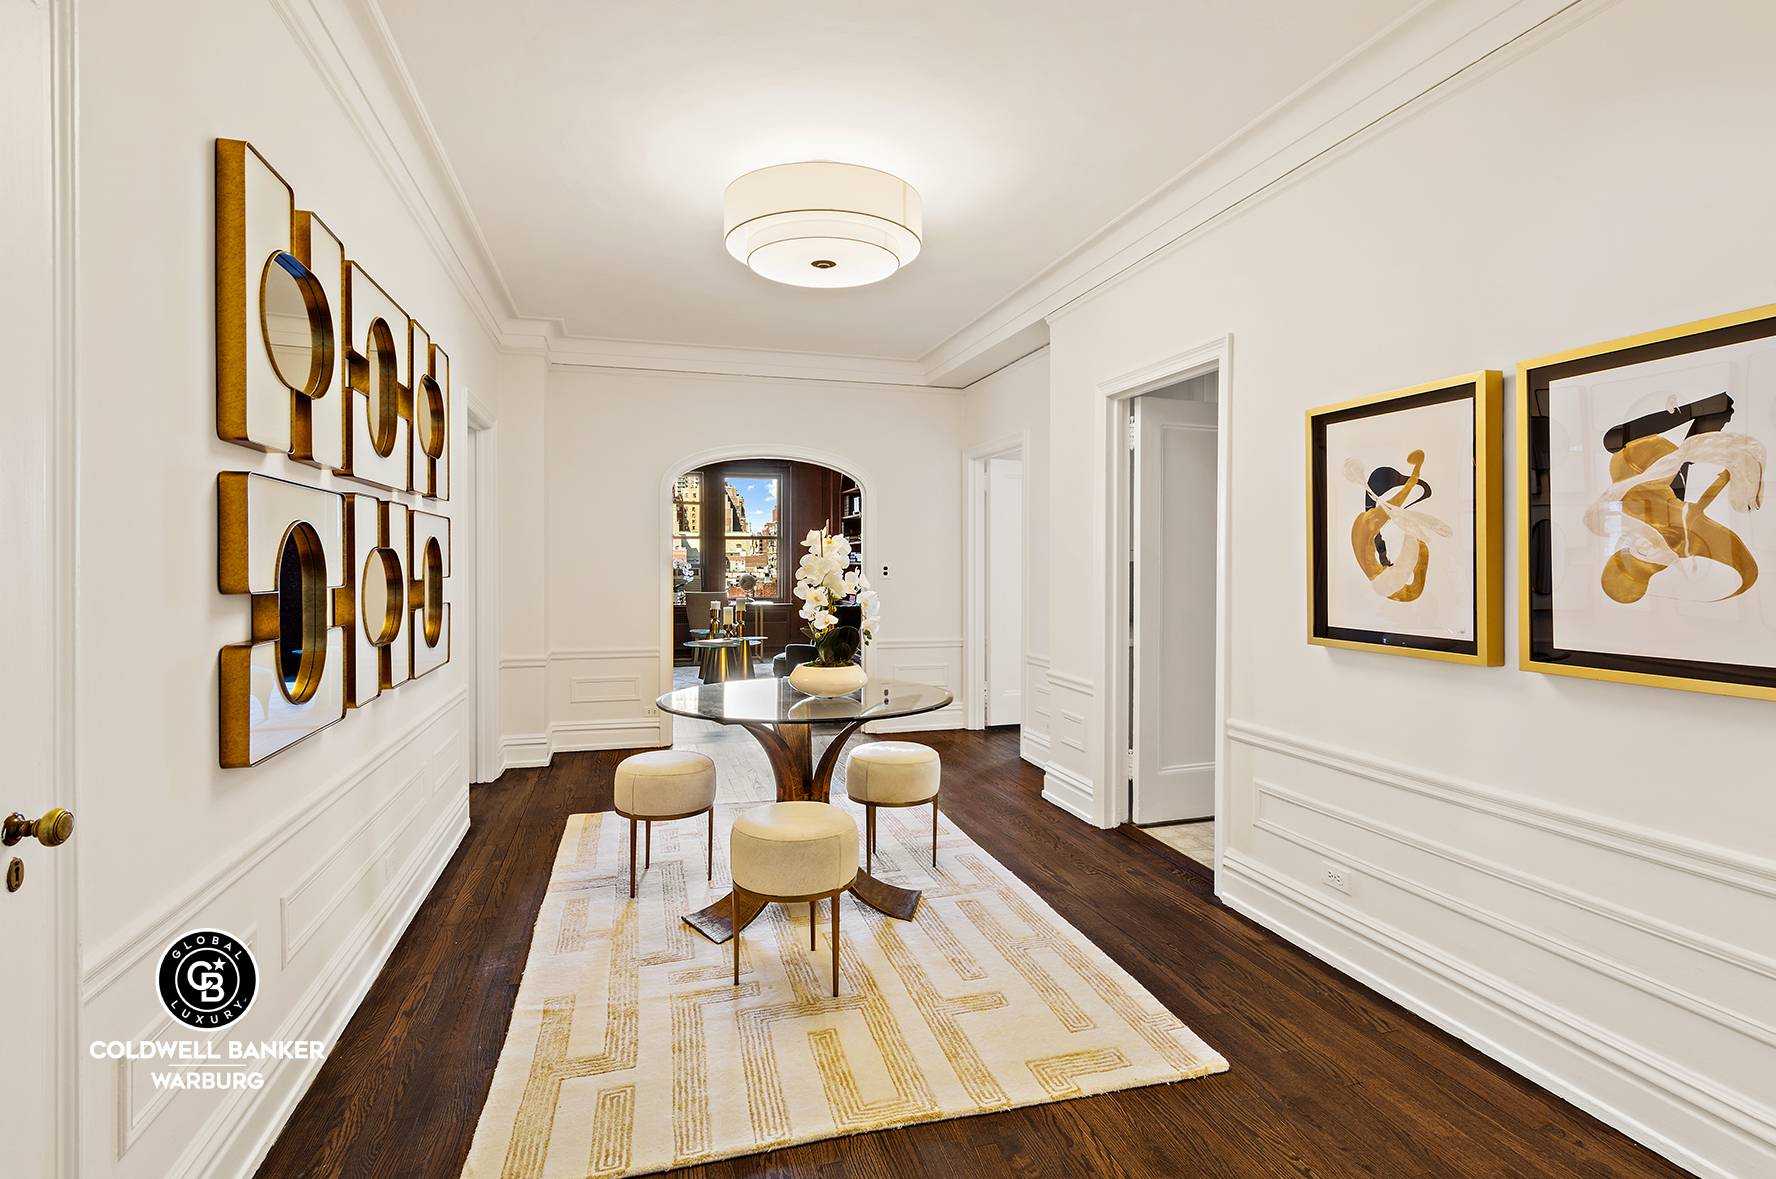 The expansive gallery leads to a stunning and sophisticated oversized living room with a WBF, a truly elegant dining room with beautiful exposure, and a perfectly placed and proportioned library.